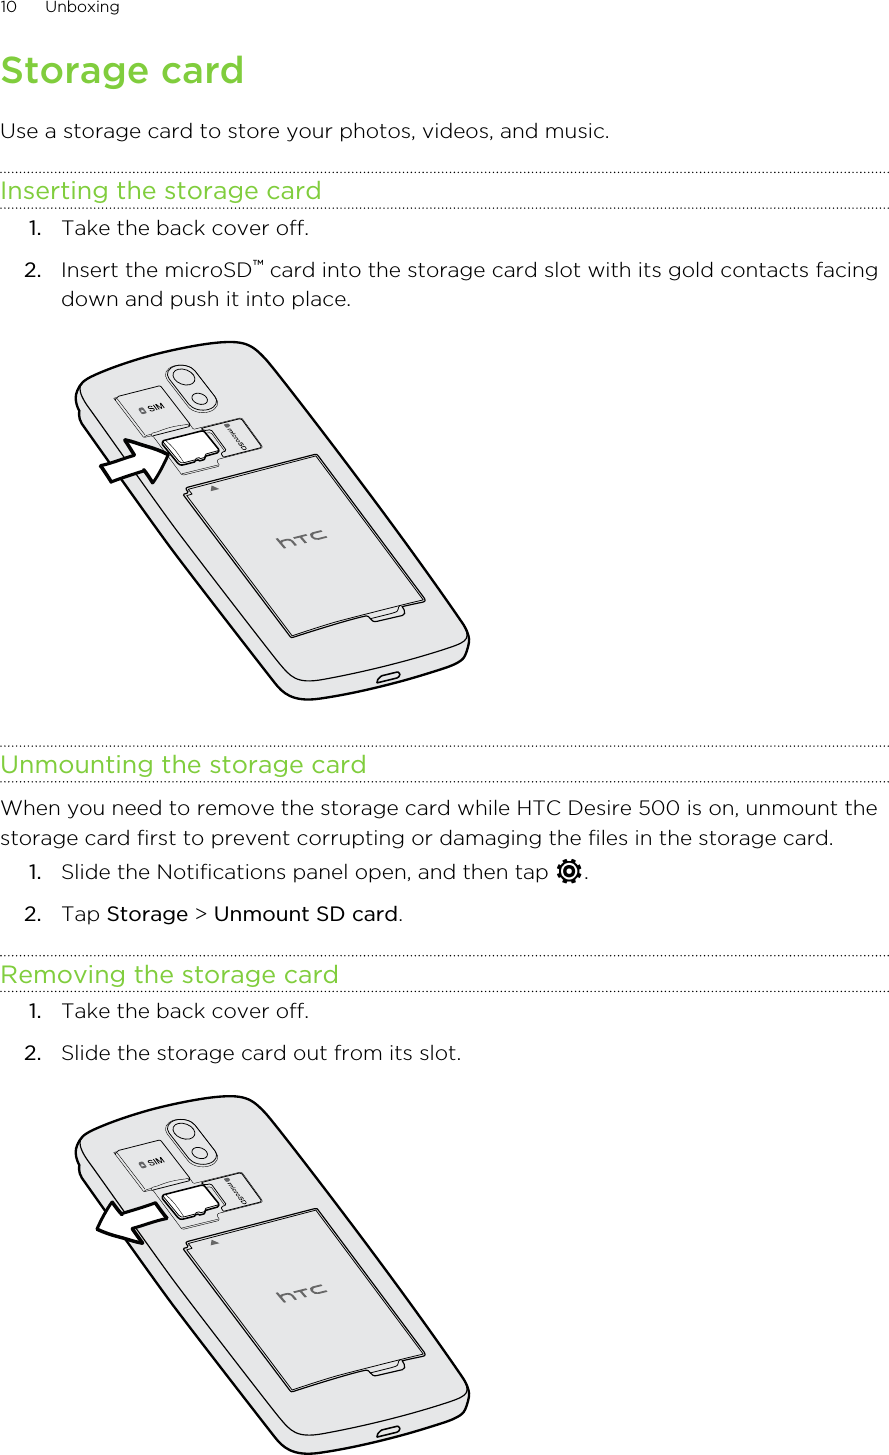 Storage cardUse a storage card to store your photos, videos, and music.Inserting the storage card1. Take the back cover off.2. Insert the microSD™ card into the storage card slot with its gold contacts facingdown and push it into place. Unmounting the storage cardWhen you need to remove the storage card while HTC Desire 500 is on, unmount thestorage card first to prevent corrupting or damaging the files in the storage card.1. Slide the Notifications panel open, and then tap  .2. Tap Storage &gt; Unmount SD card.Removing the storage card1. Take the back cover off.2. Slide the storage card out from its slot. 10 Unboxing